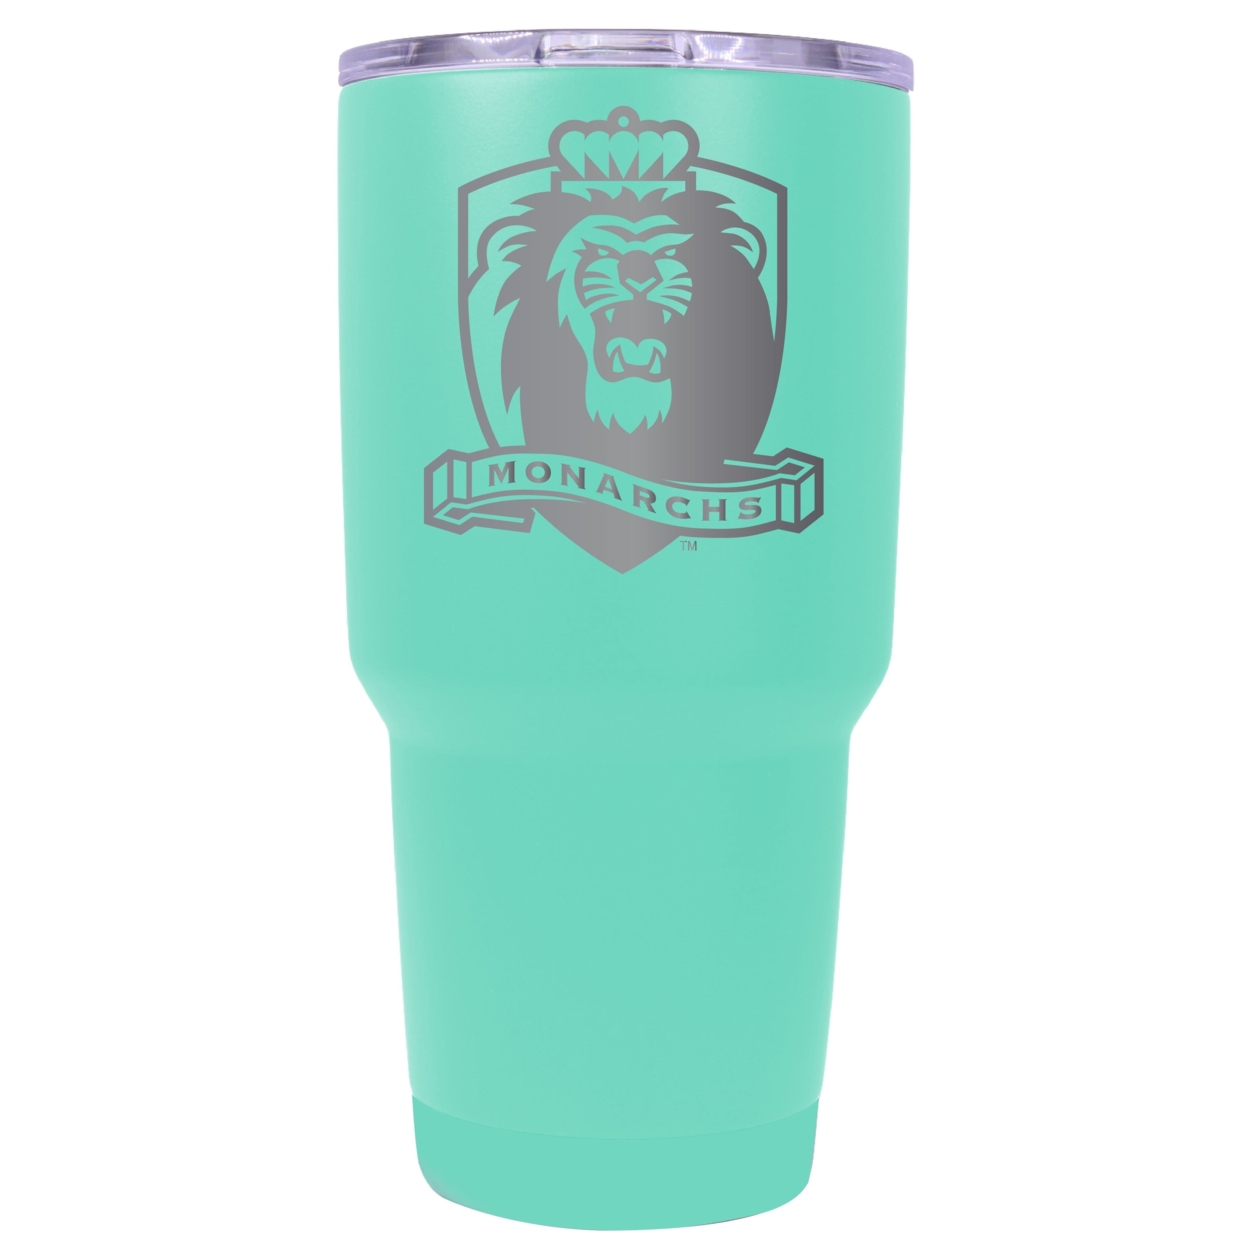 Old Dominion Monarchs 24 Oz Laser Engraved Stainless Steel Insulated Tumbler - Choose Your Color. - Seafoam